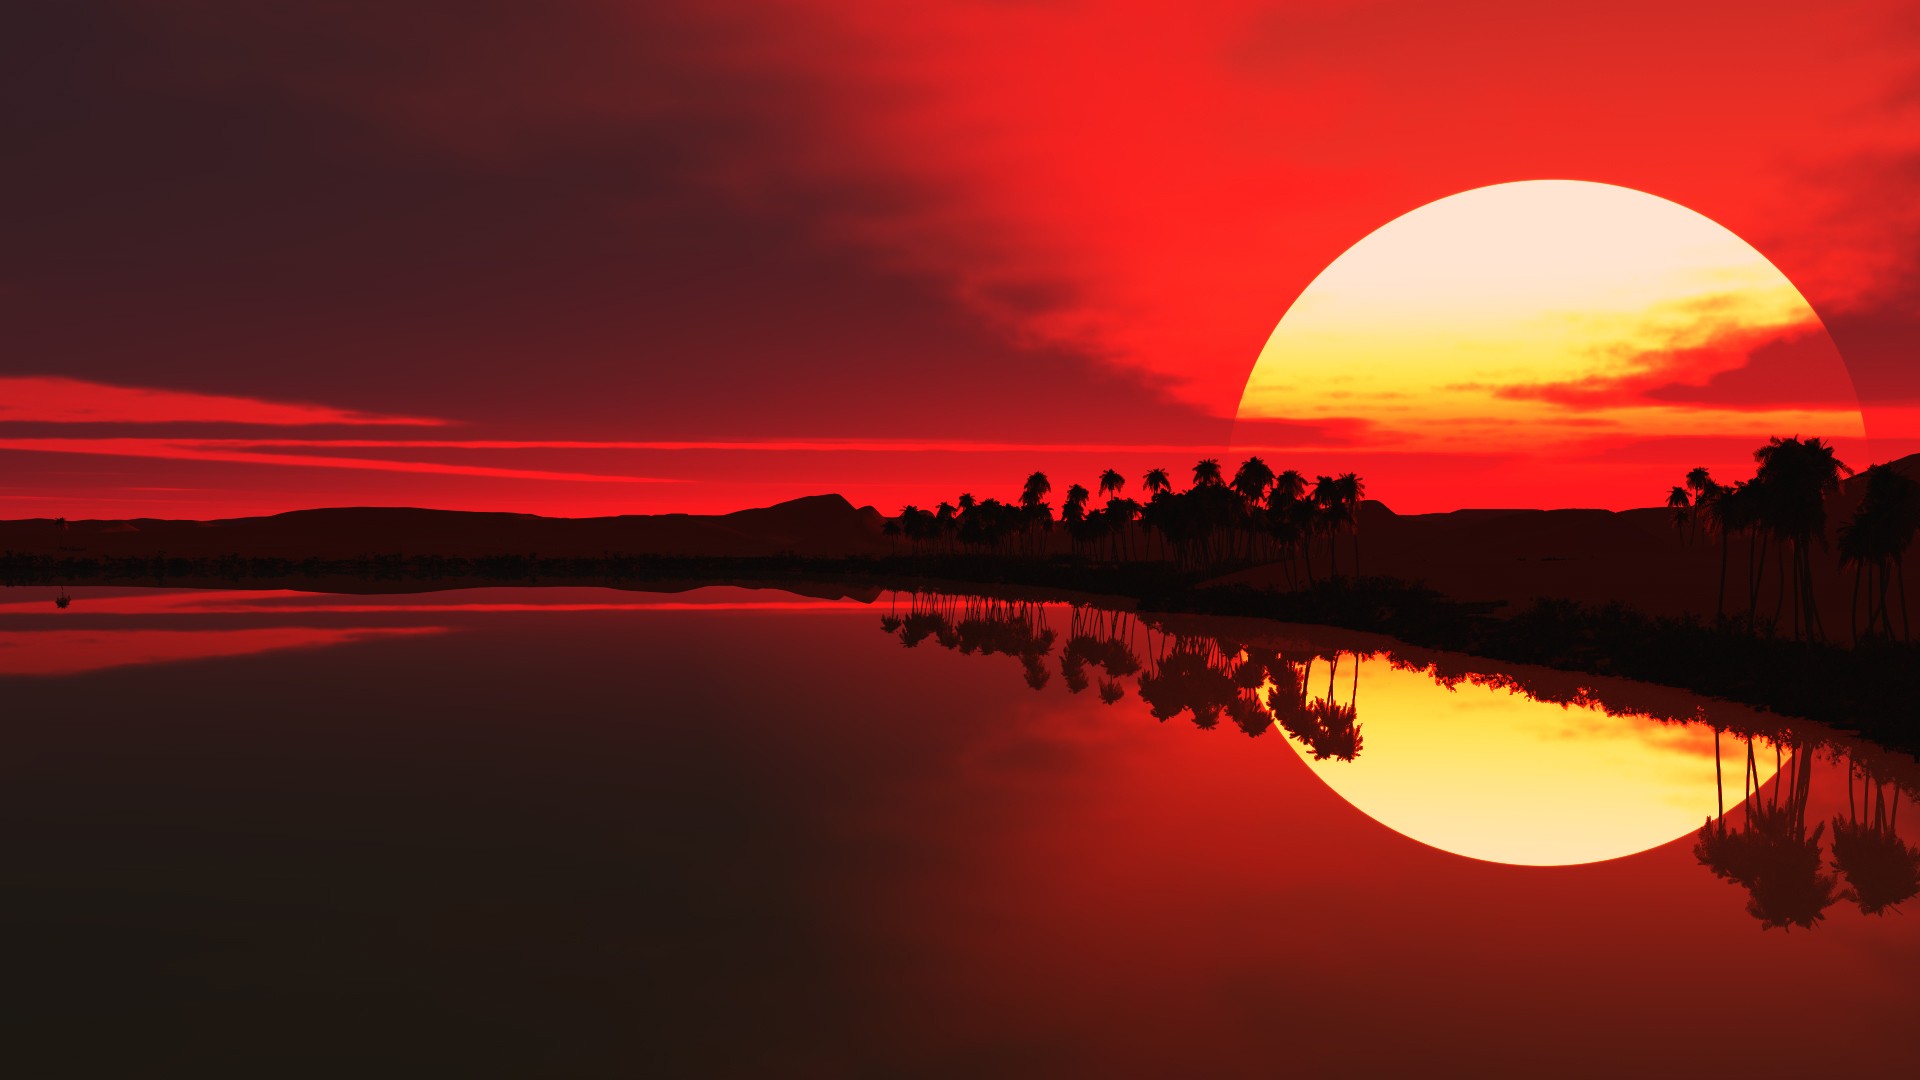 General 1920x1080 sunset nature reflection Sun sunlight trees water sky palm trees red red sun